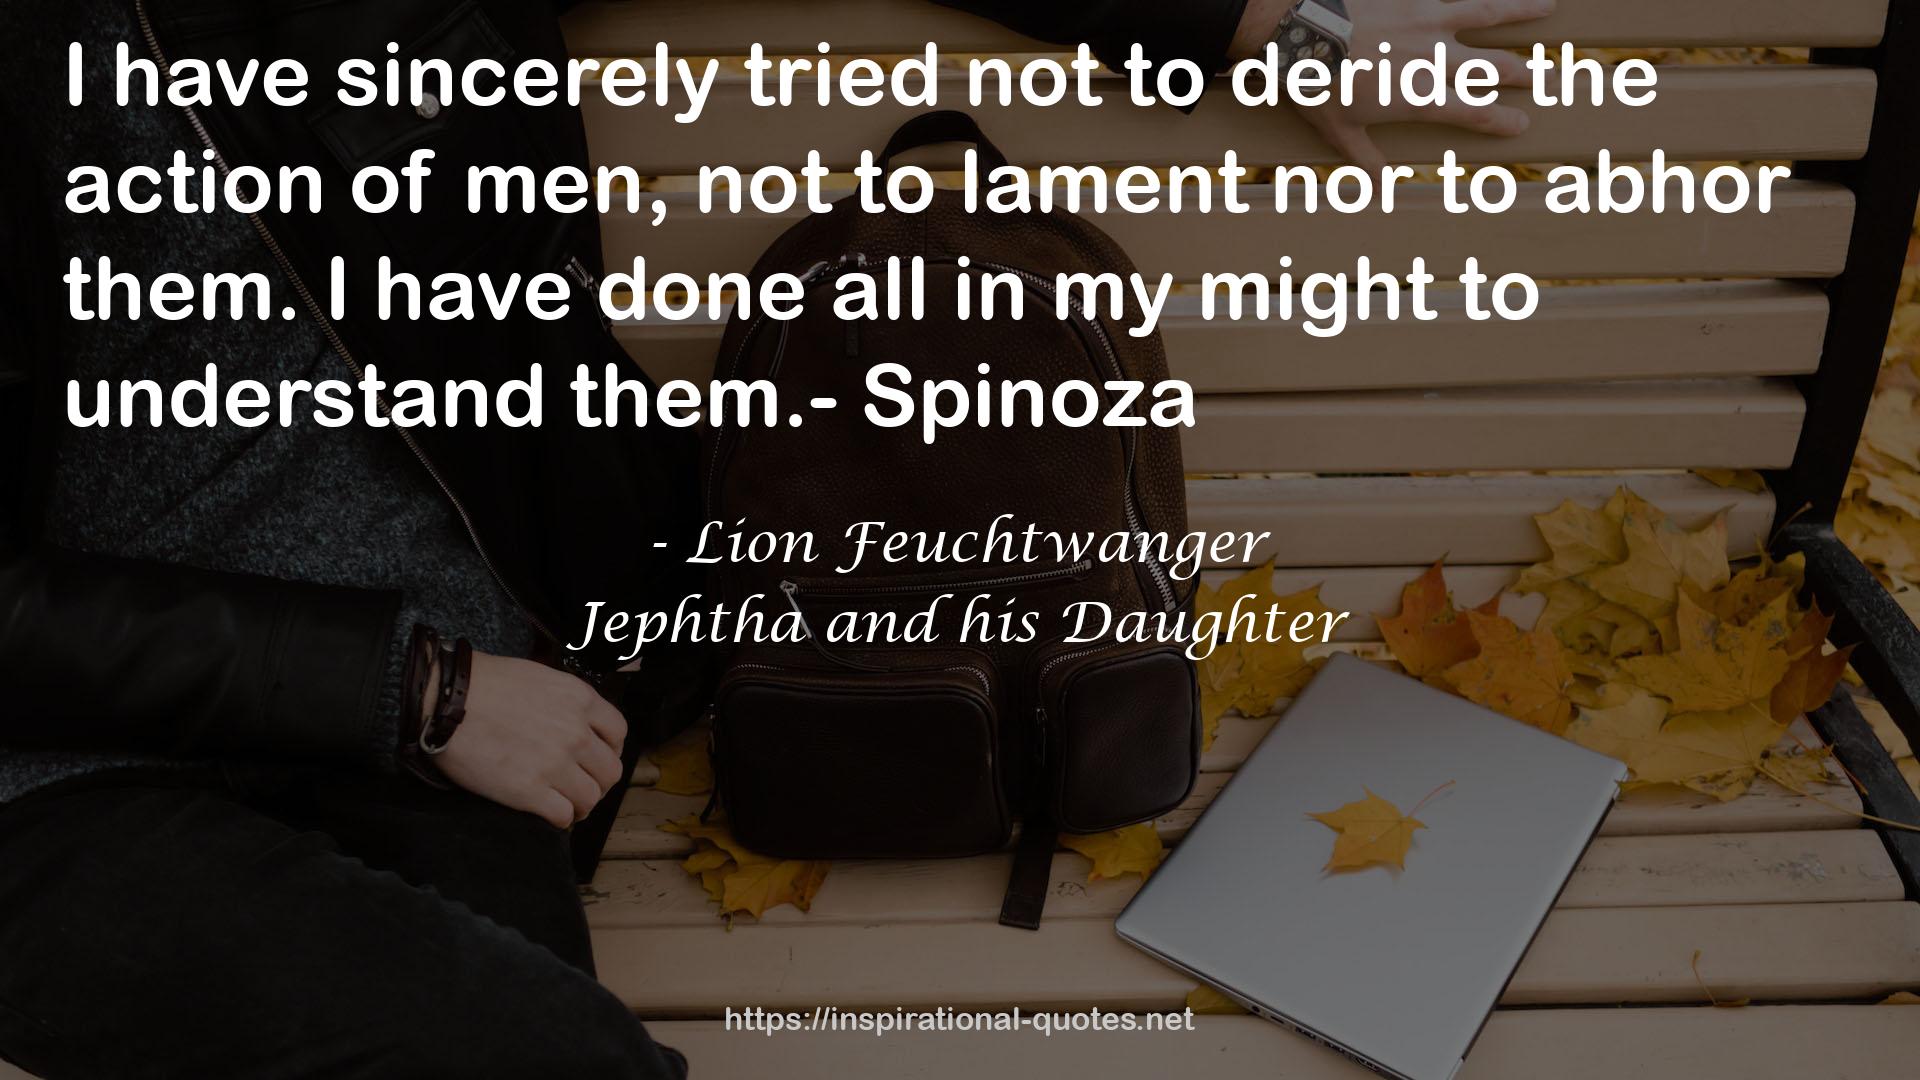 Jephtha and his Daughter QUOTES